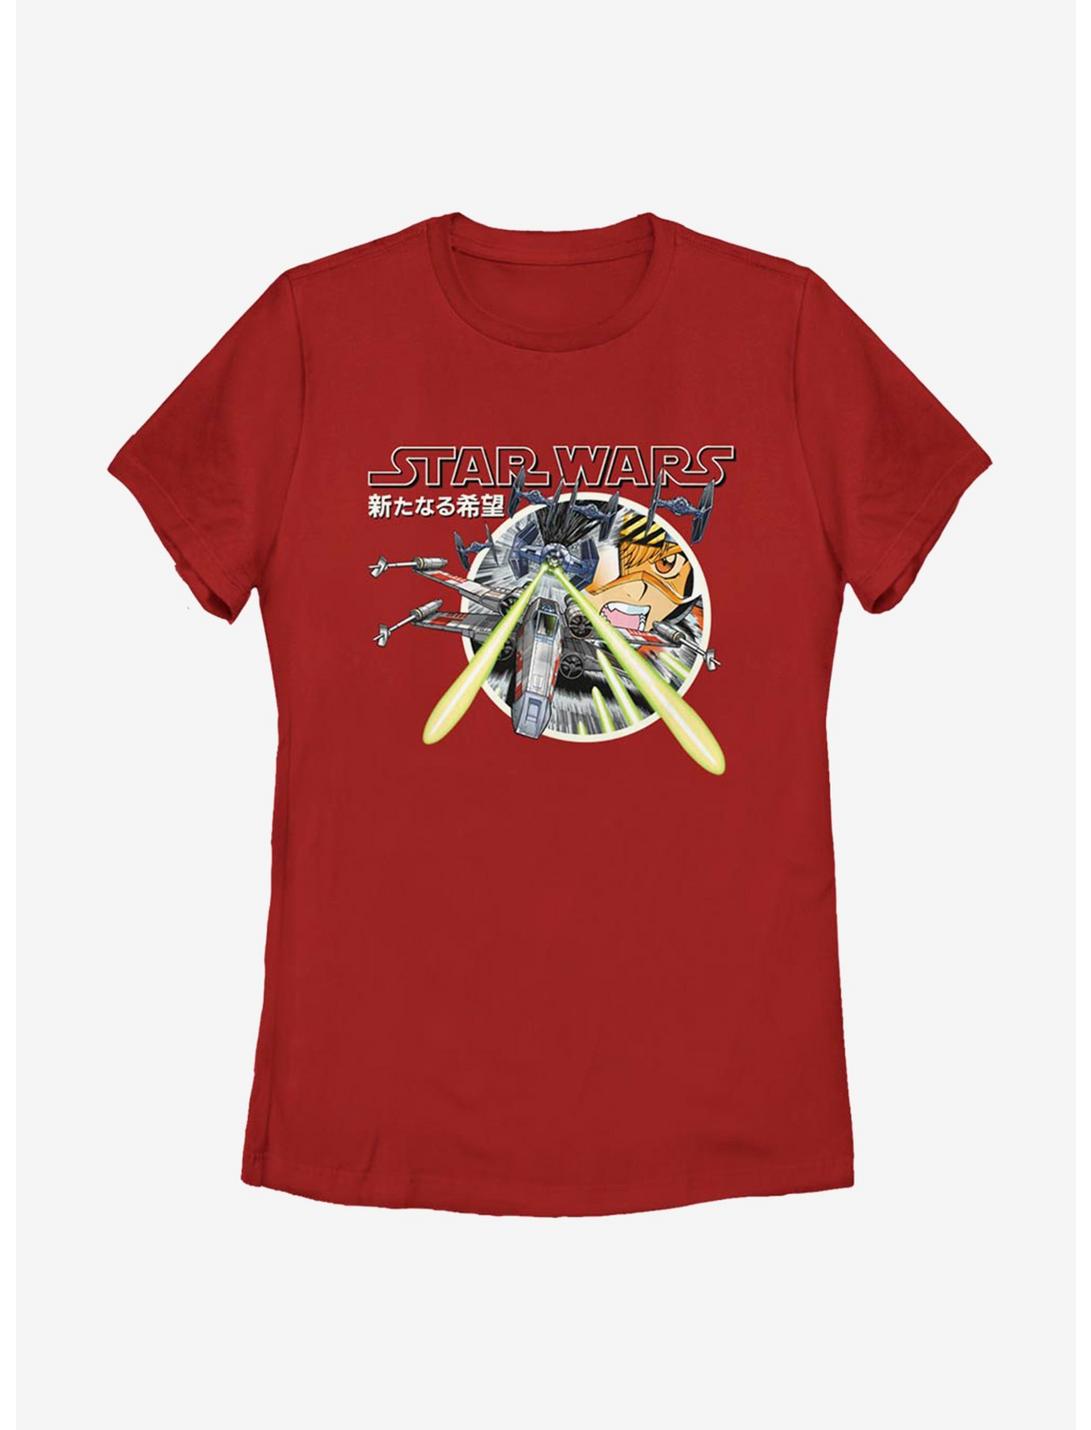 Star Wars Red Run Japanese Text Womens T-Shirt, RED, hi-res